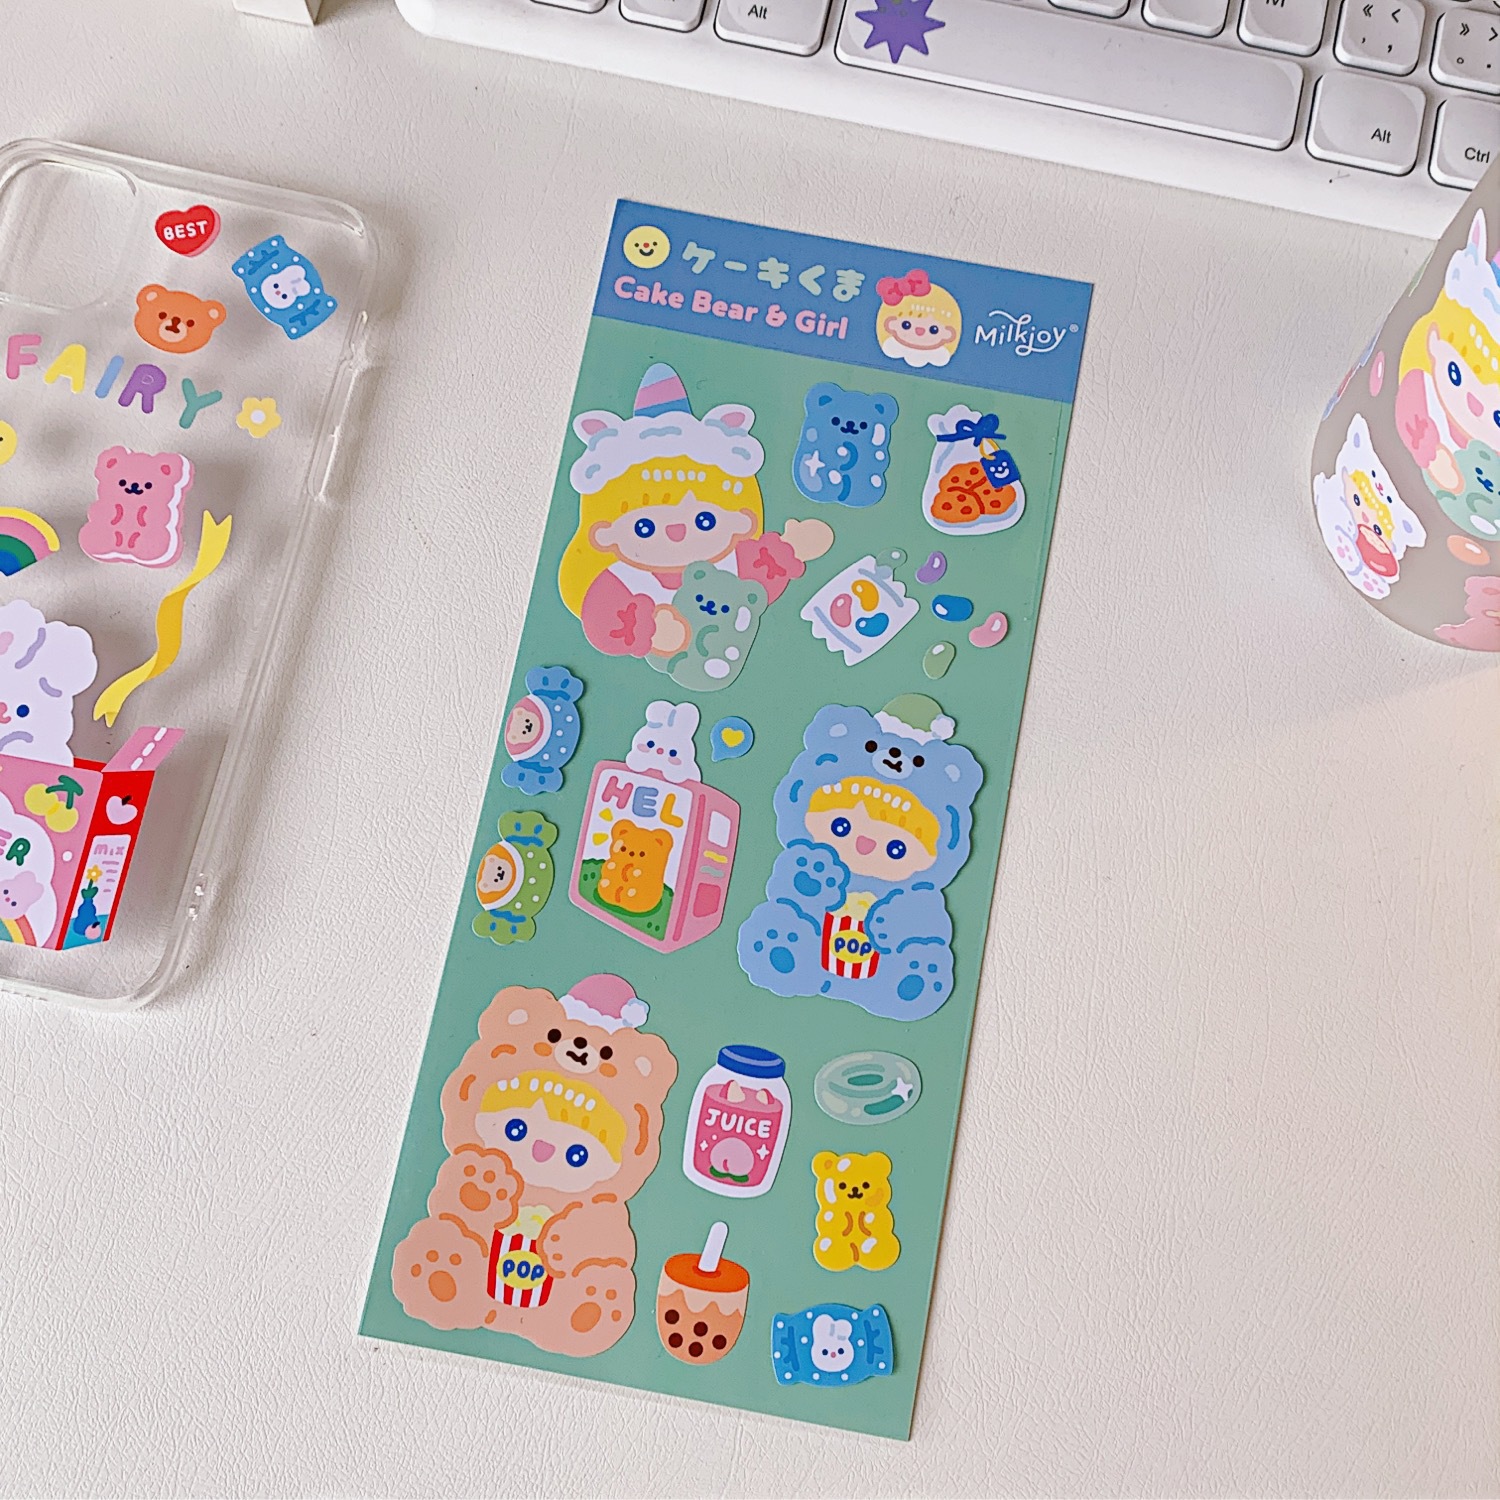 4. Candy Bearthe republic of korea ins Soft sprout Bear Hand account Stickers Super cute lovely Mobile phone shell interest Stickers Water cup decorate Sealer